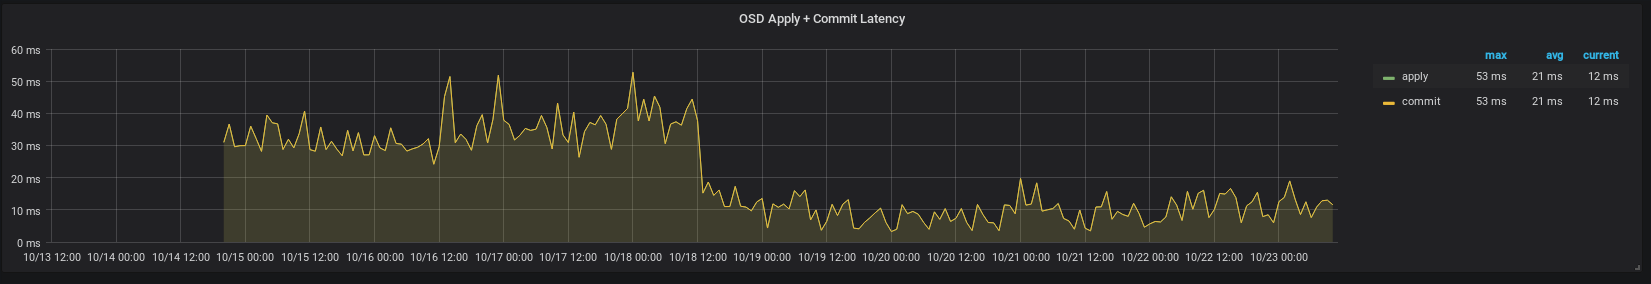 osd latency before and after